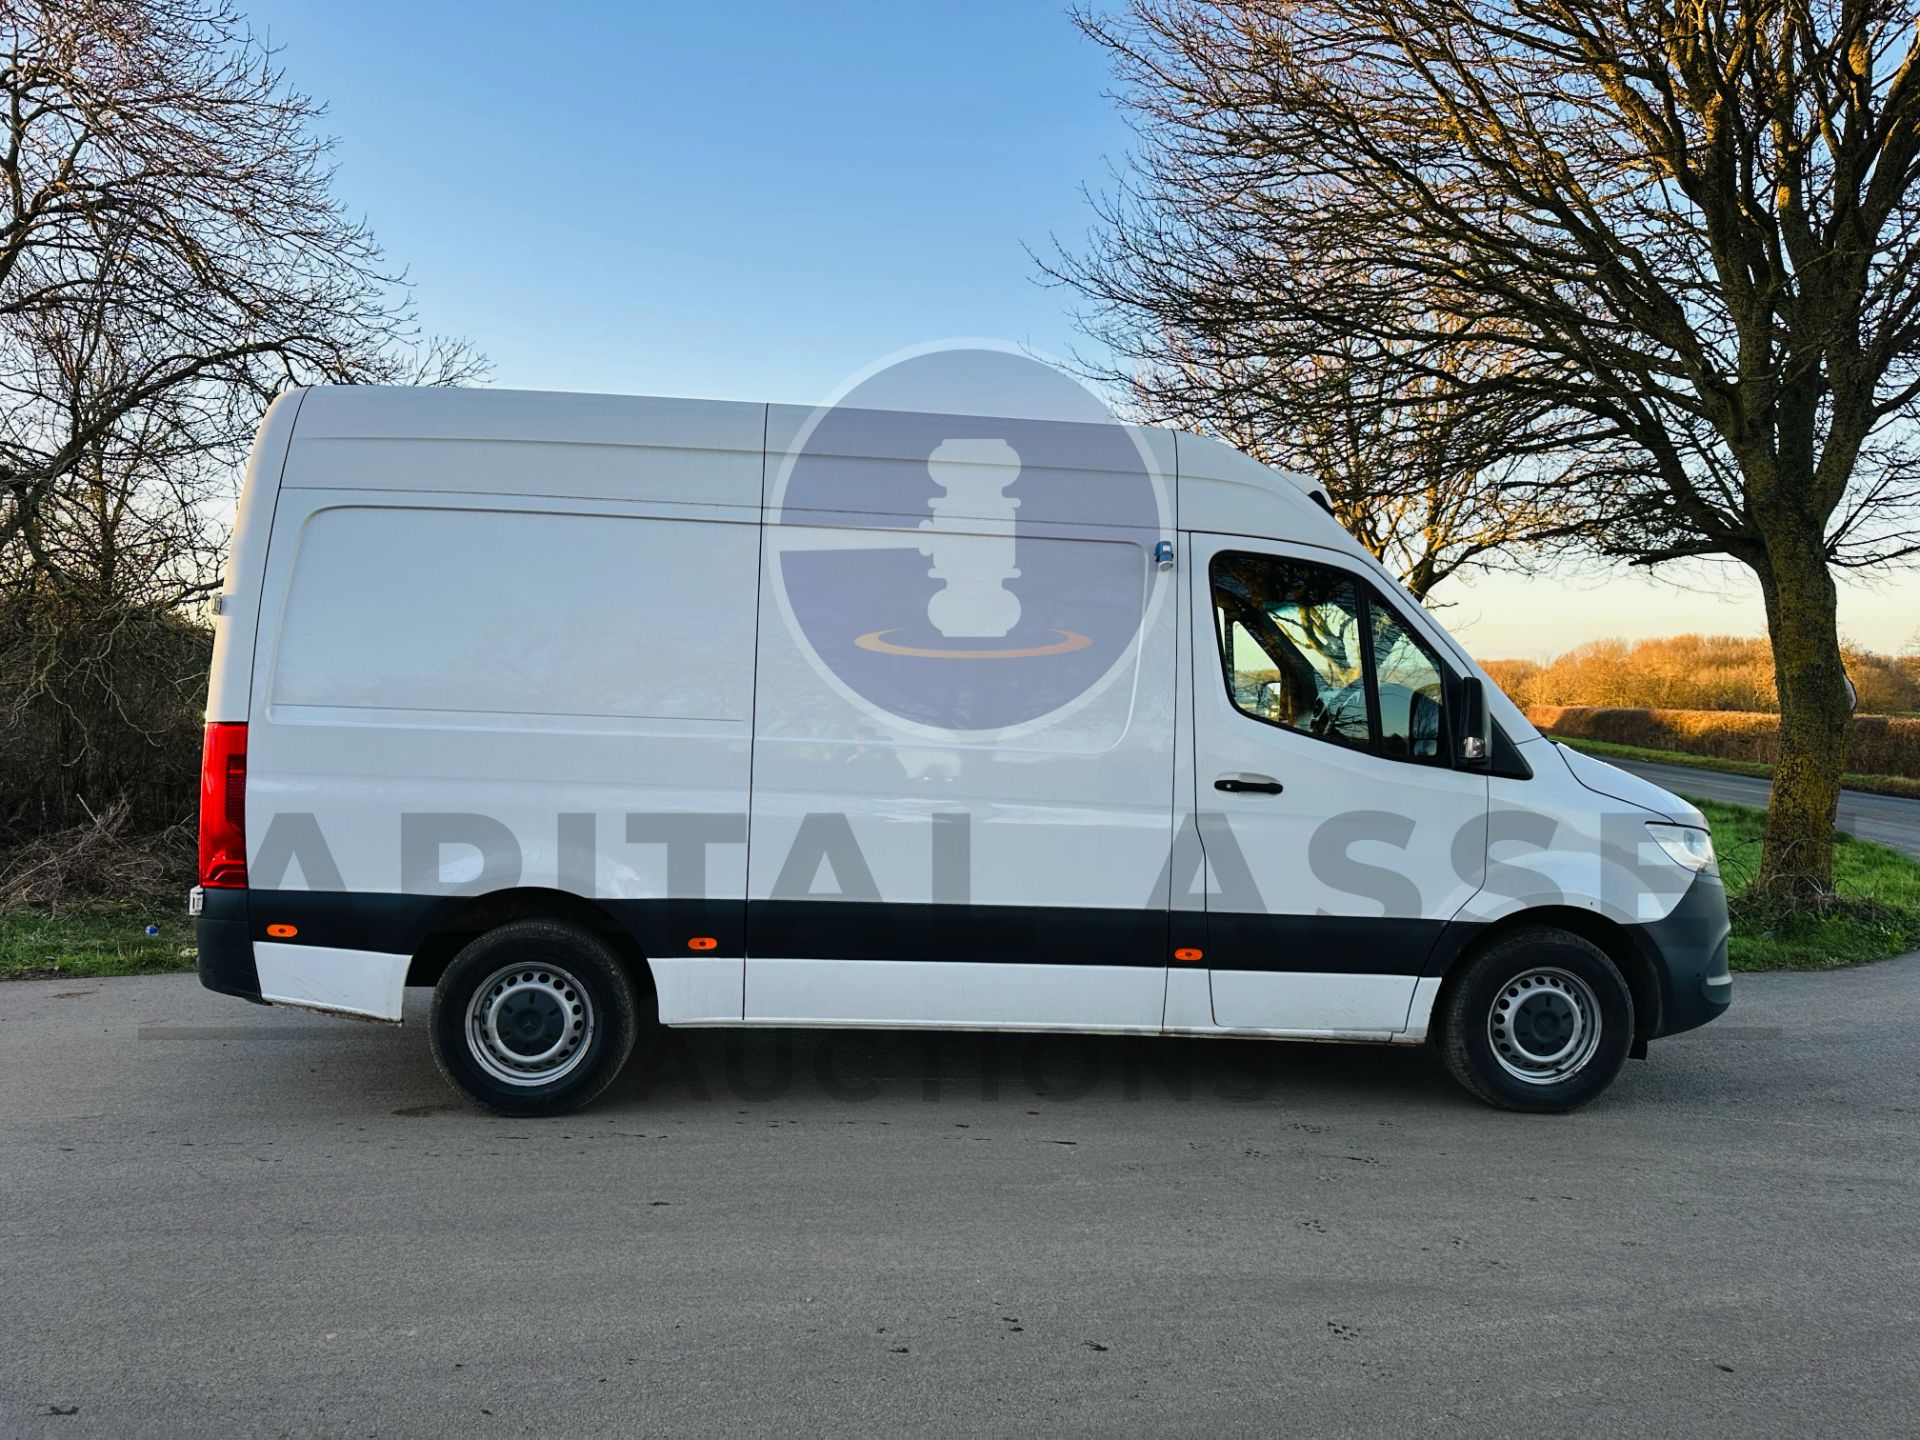 MERCEDES-BENZ SPRINTER 314 CDI *MWB - REFRIGERATED VAN* (2019 - FACELIFT MODEL) *OVERNIGHT STANDBY* - Image 10 of 33